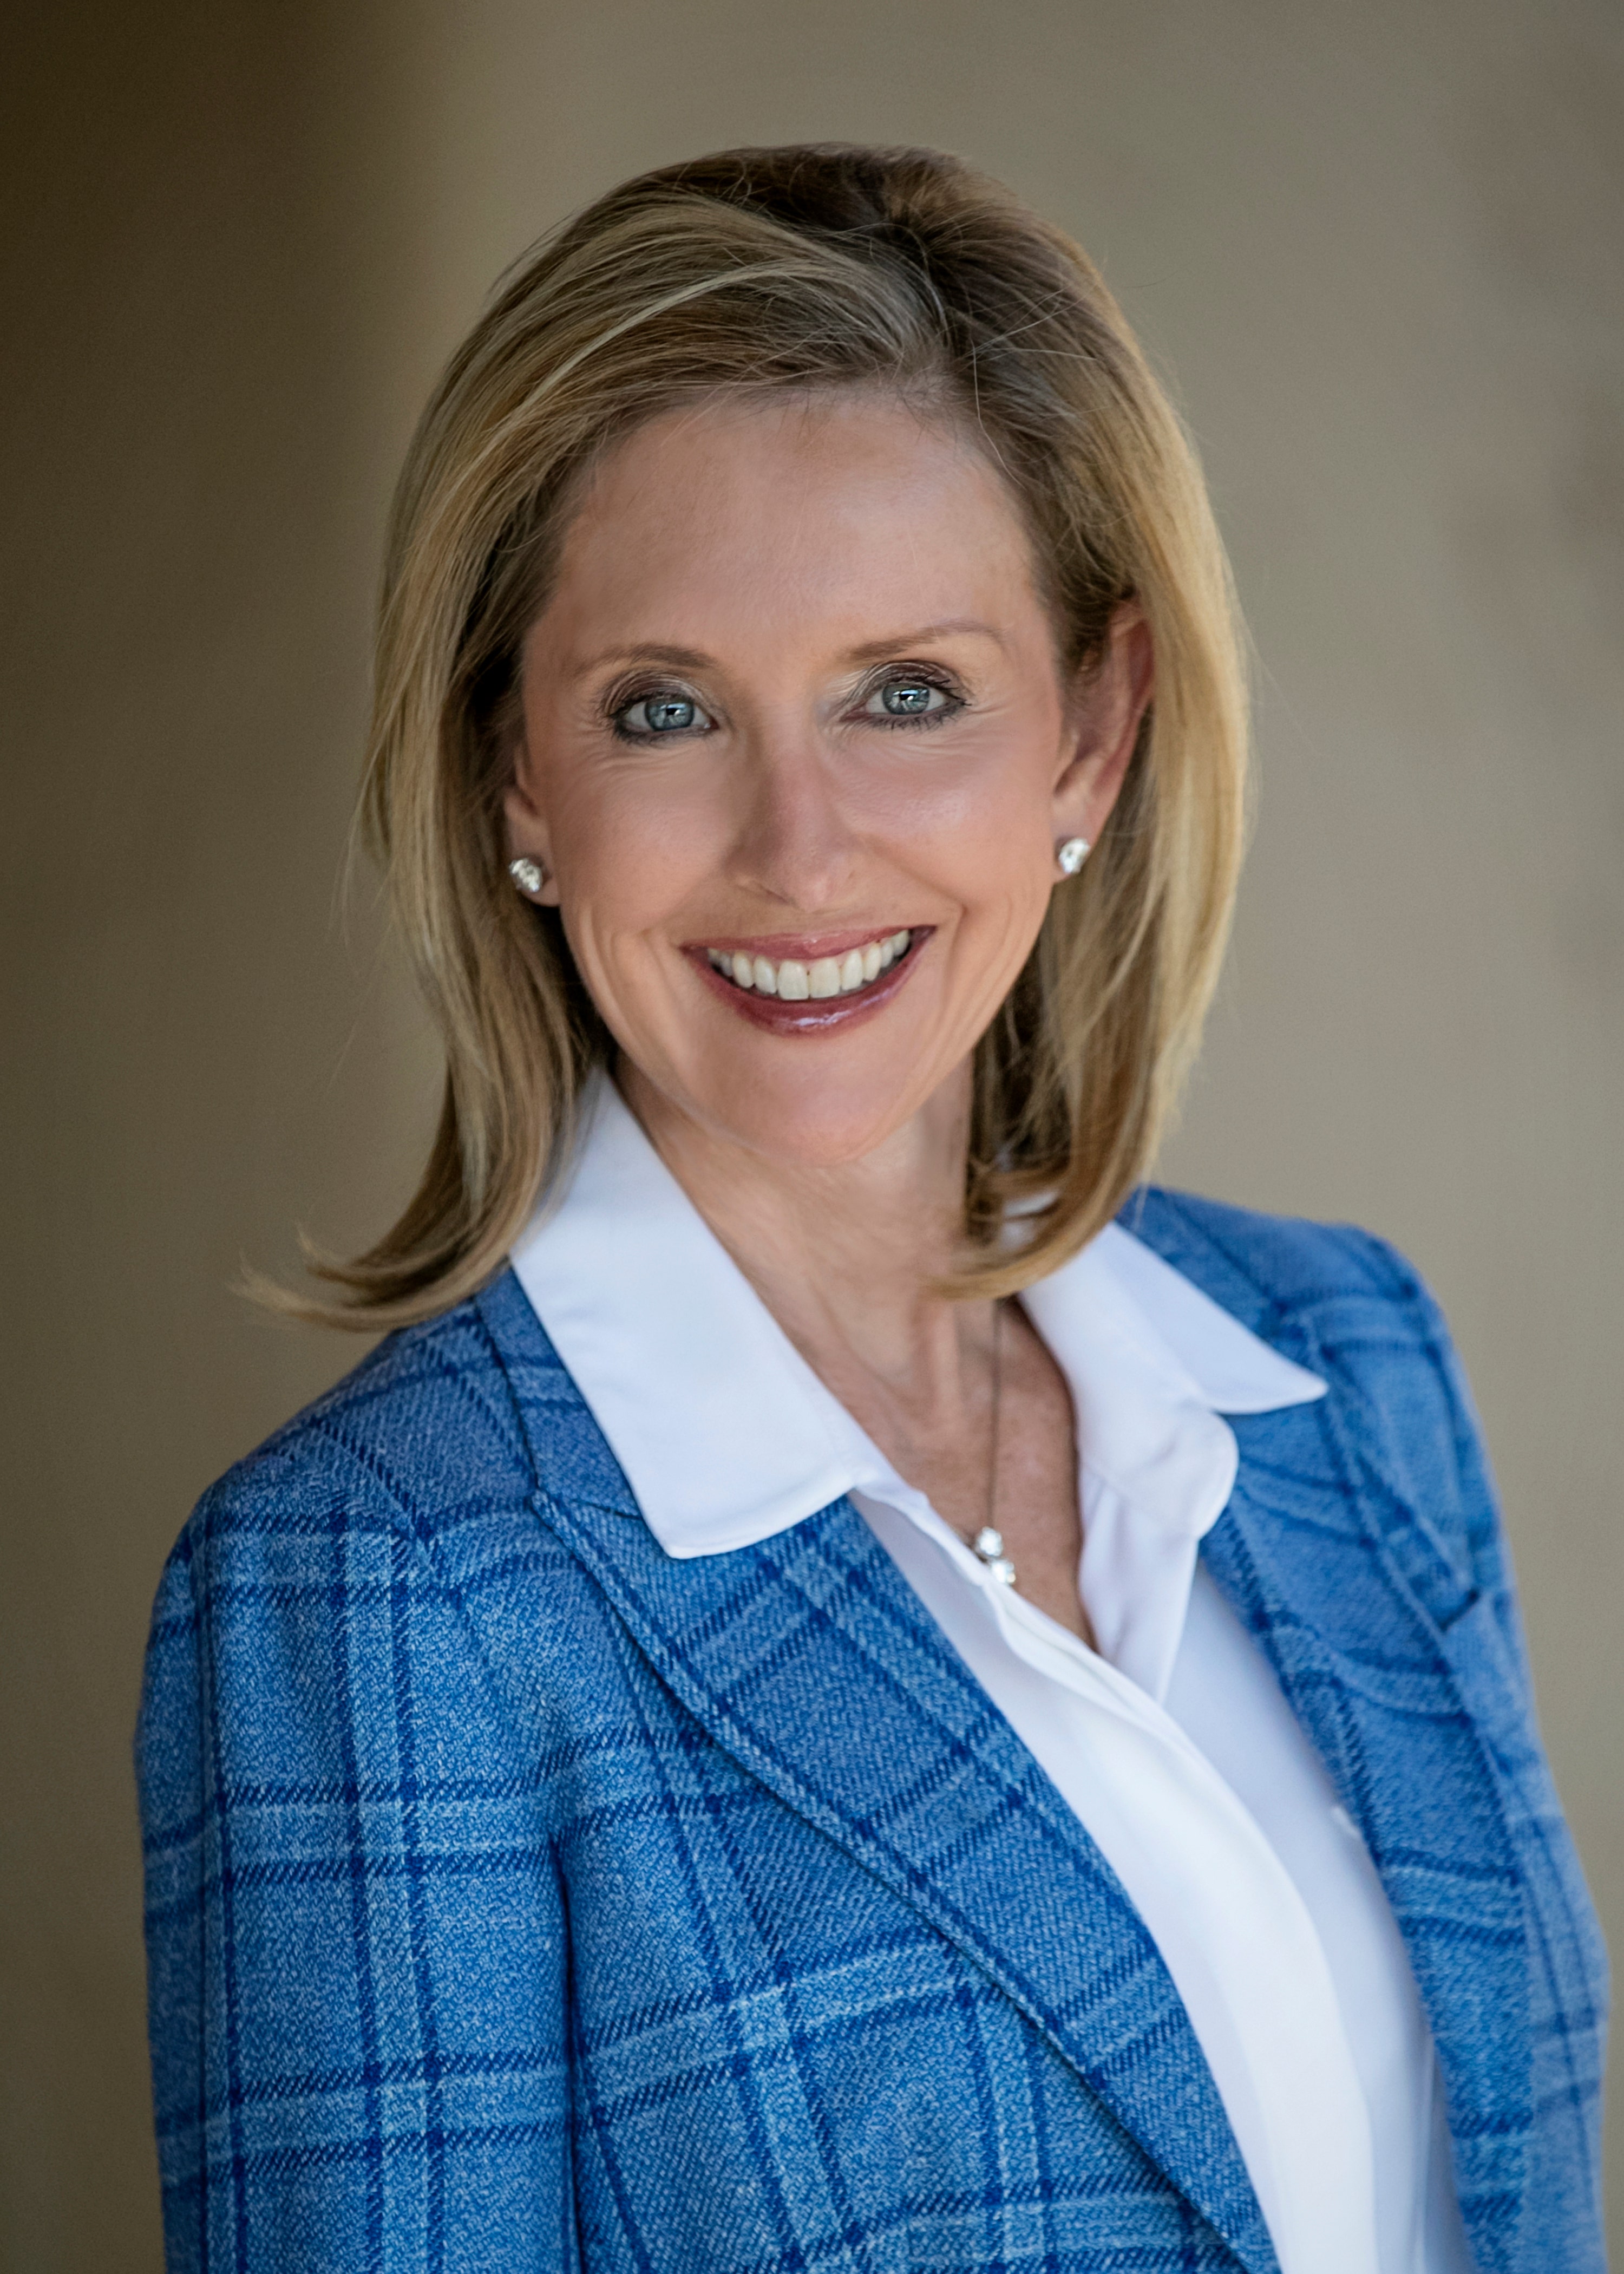 Republican Arizona governor candidate Karrin Taylor Robson backed by Salmon